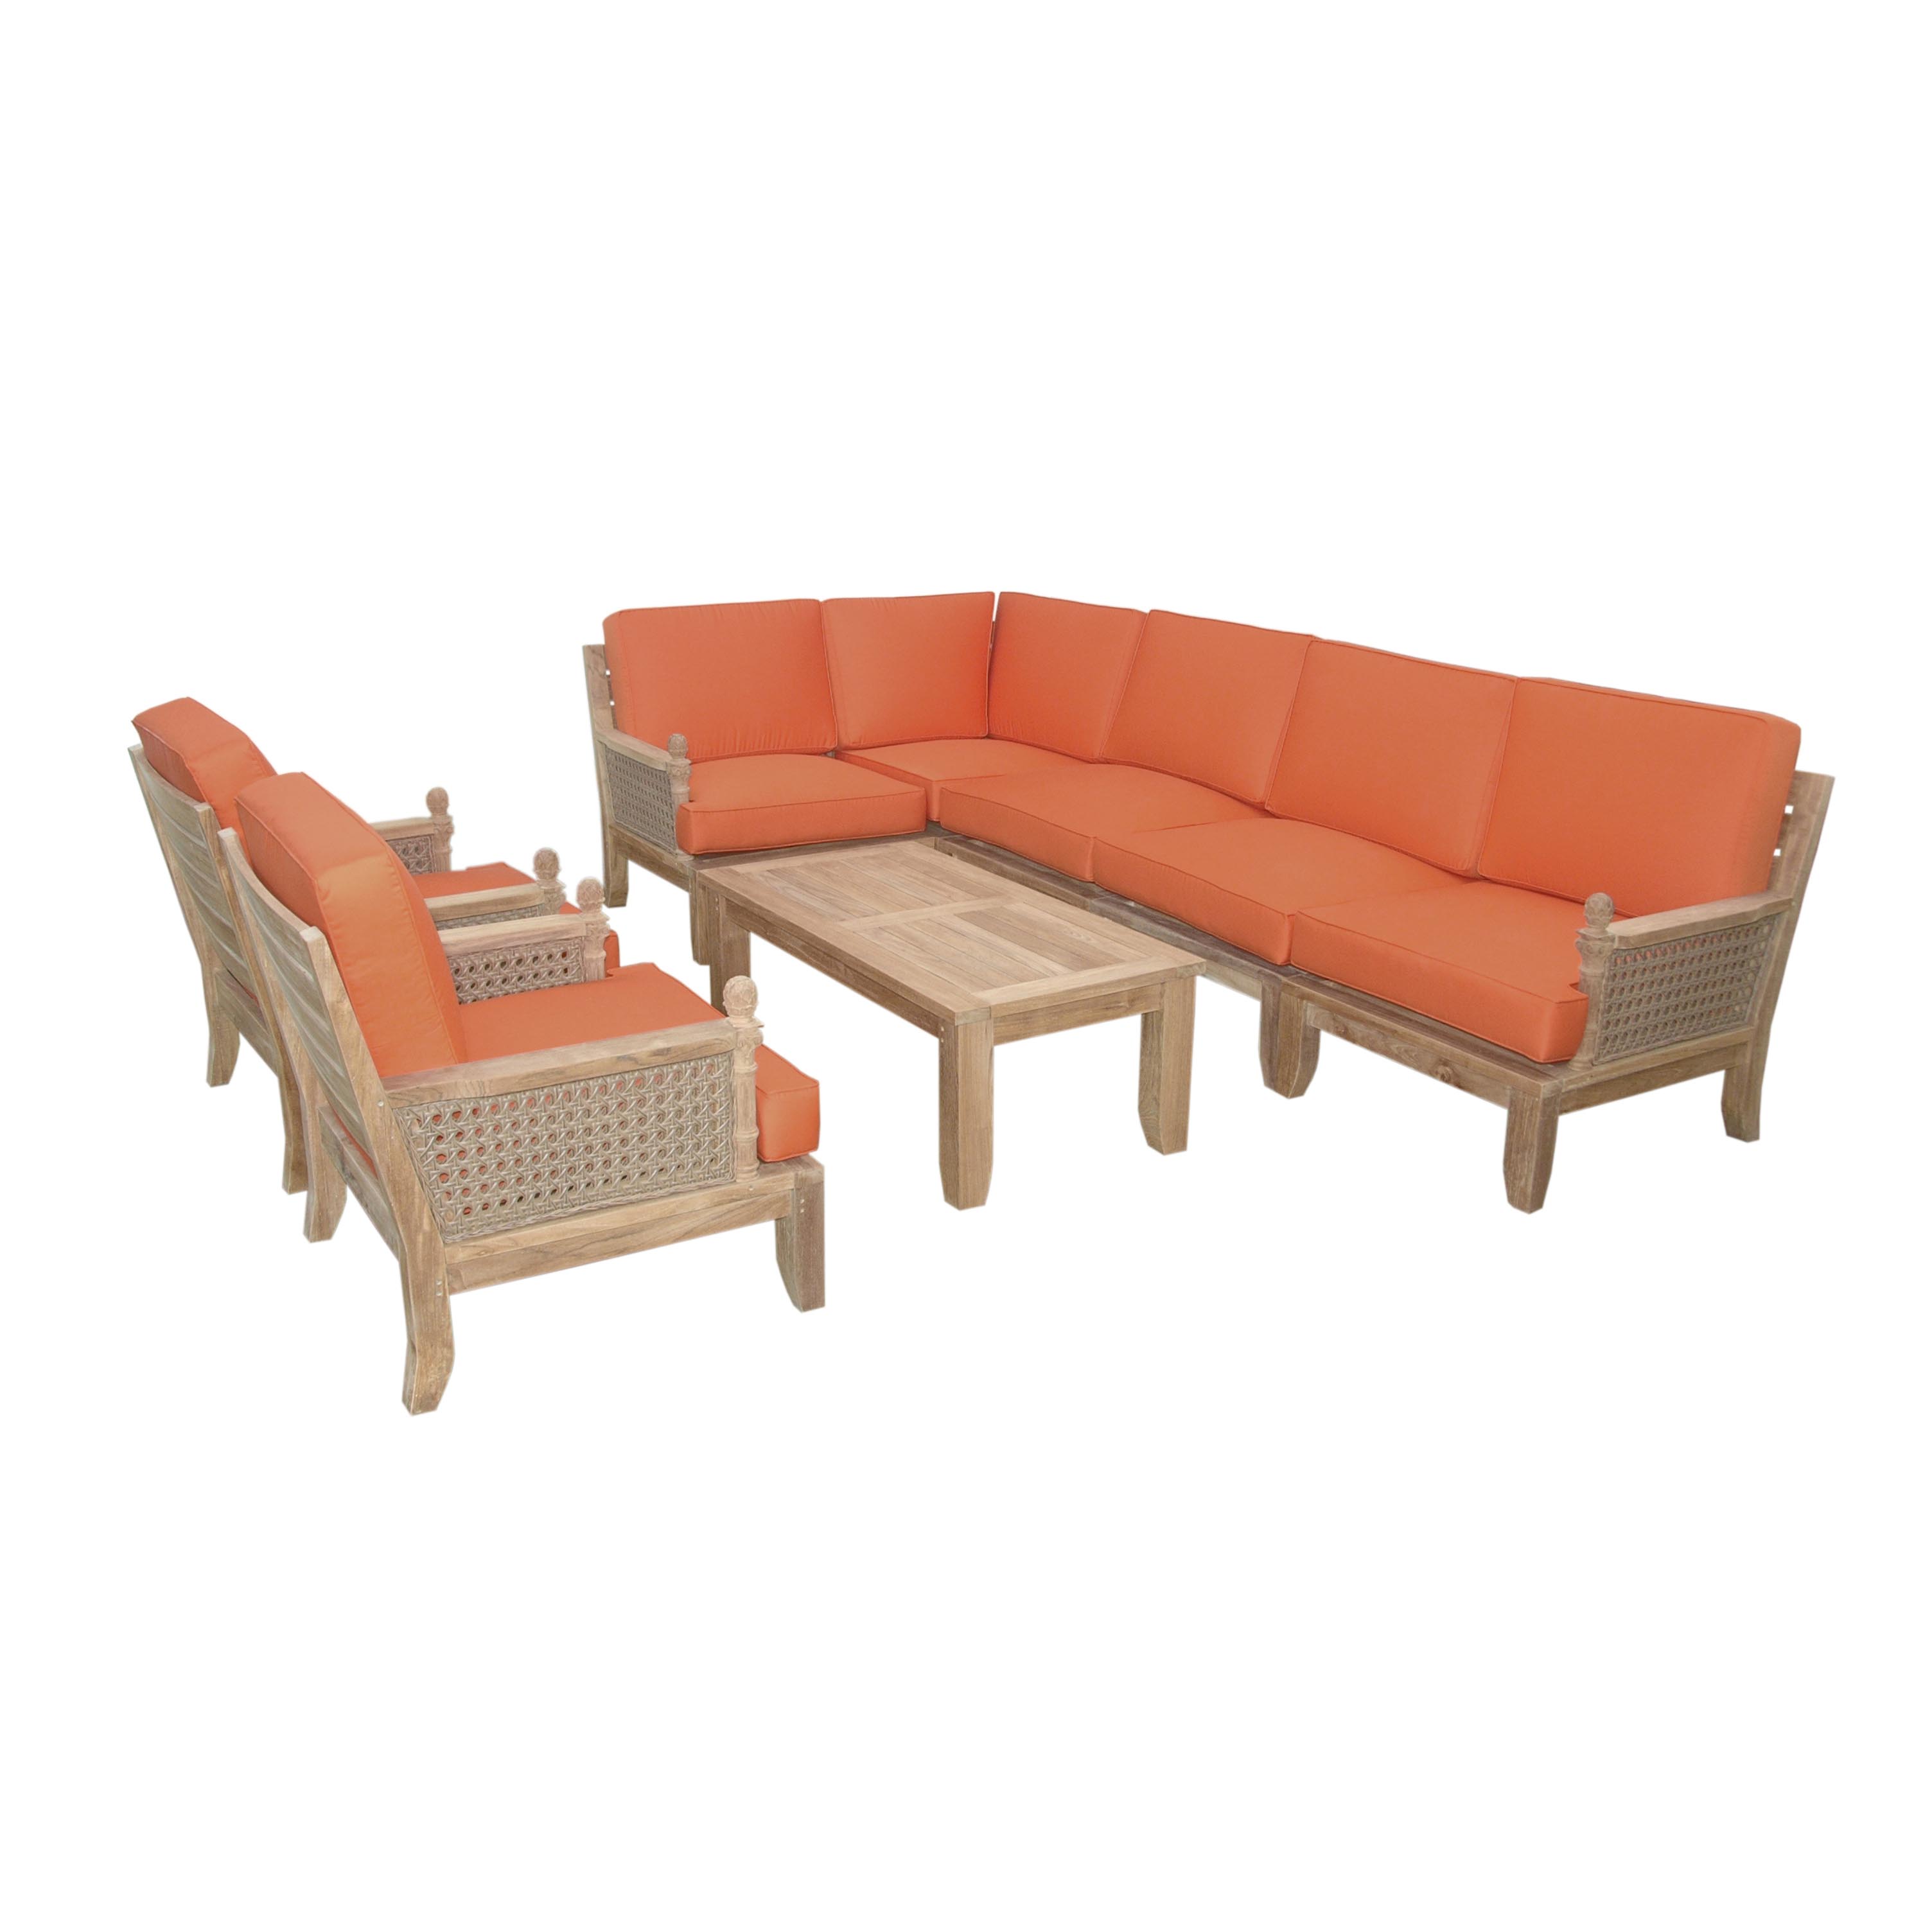 Teak Luxe Seating Collection W/ 2 Center Seats & 2 Arm Chairs